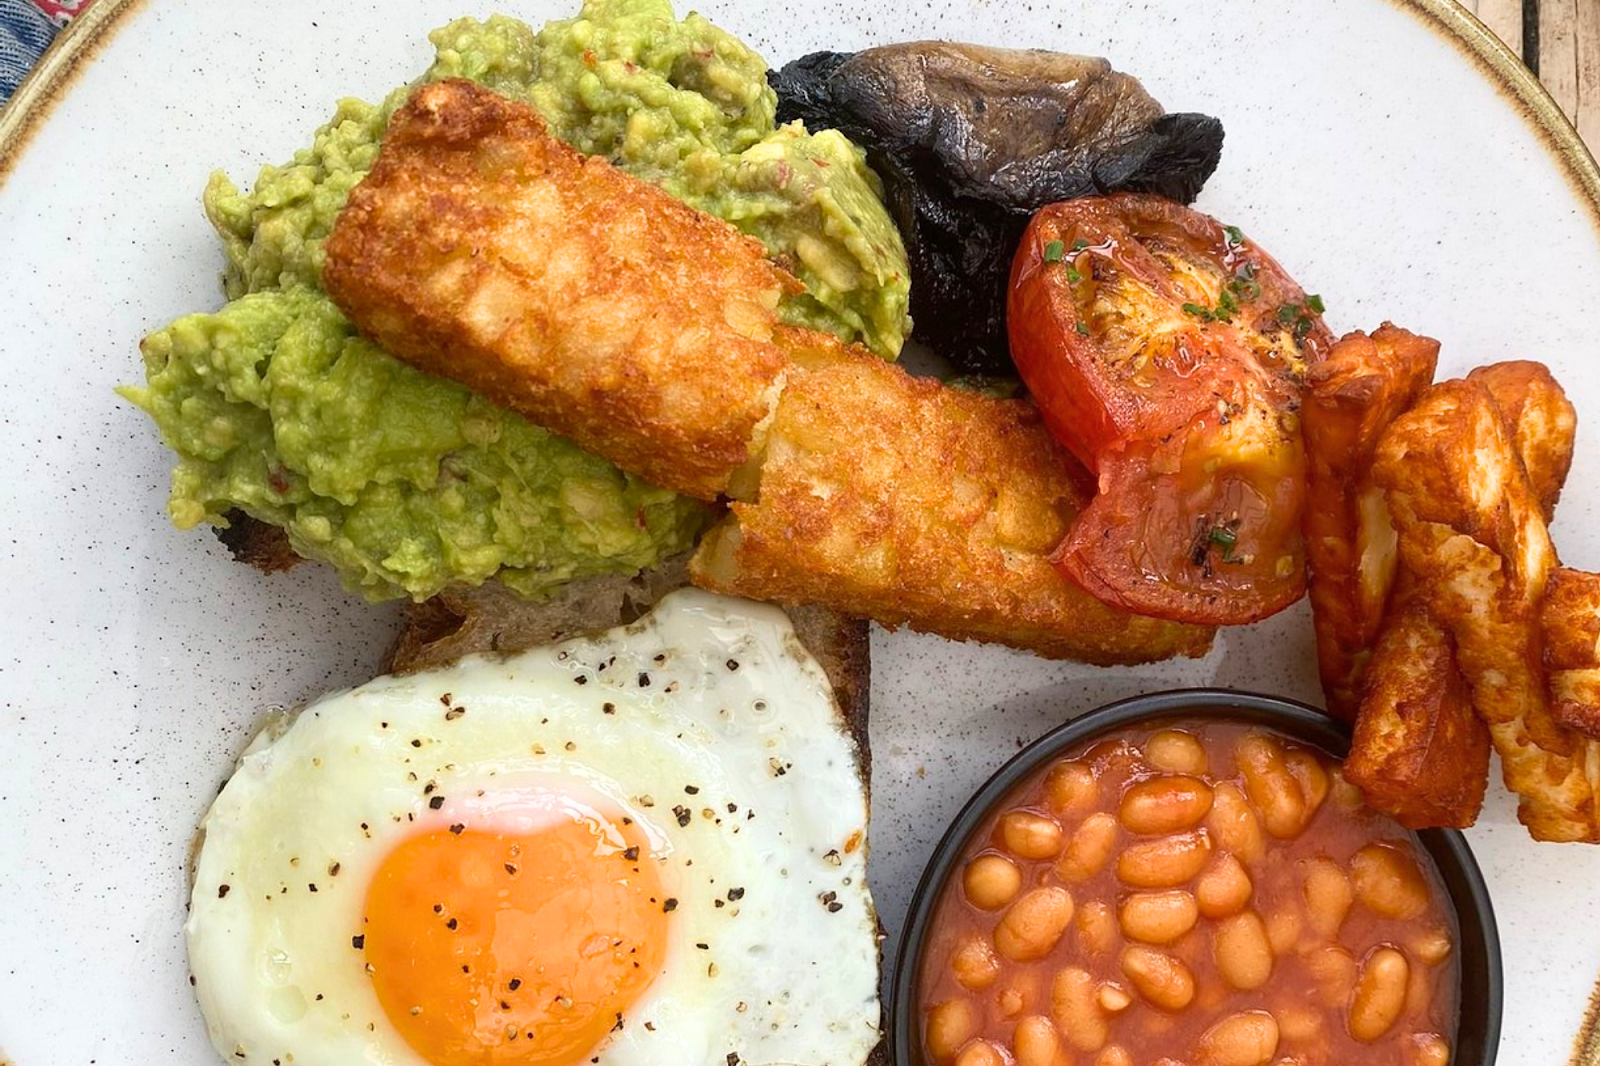 Try this healthy breakfast in Liverpool 